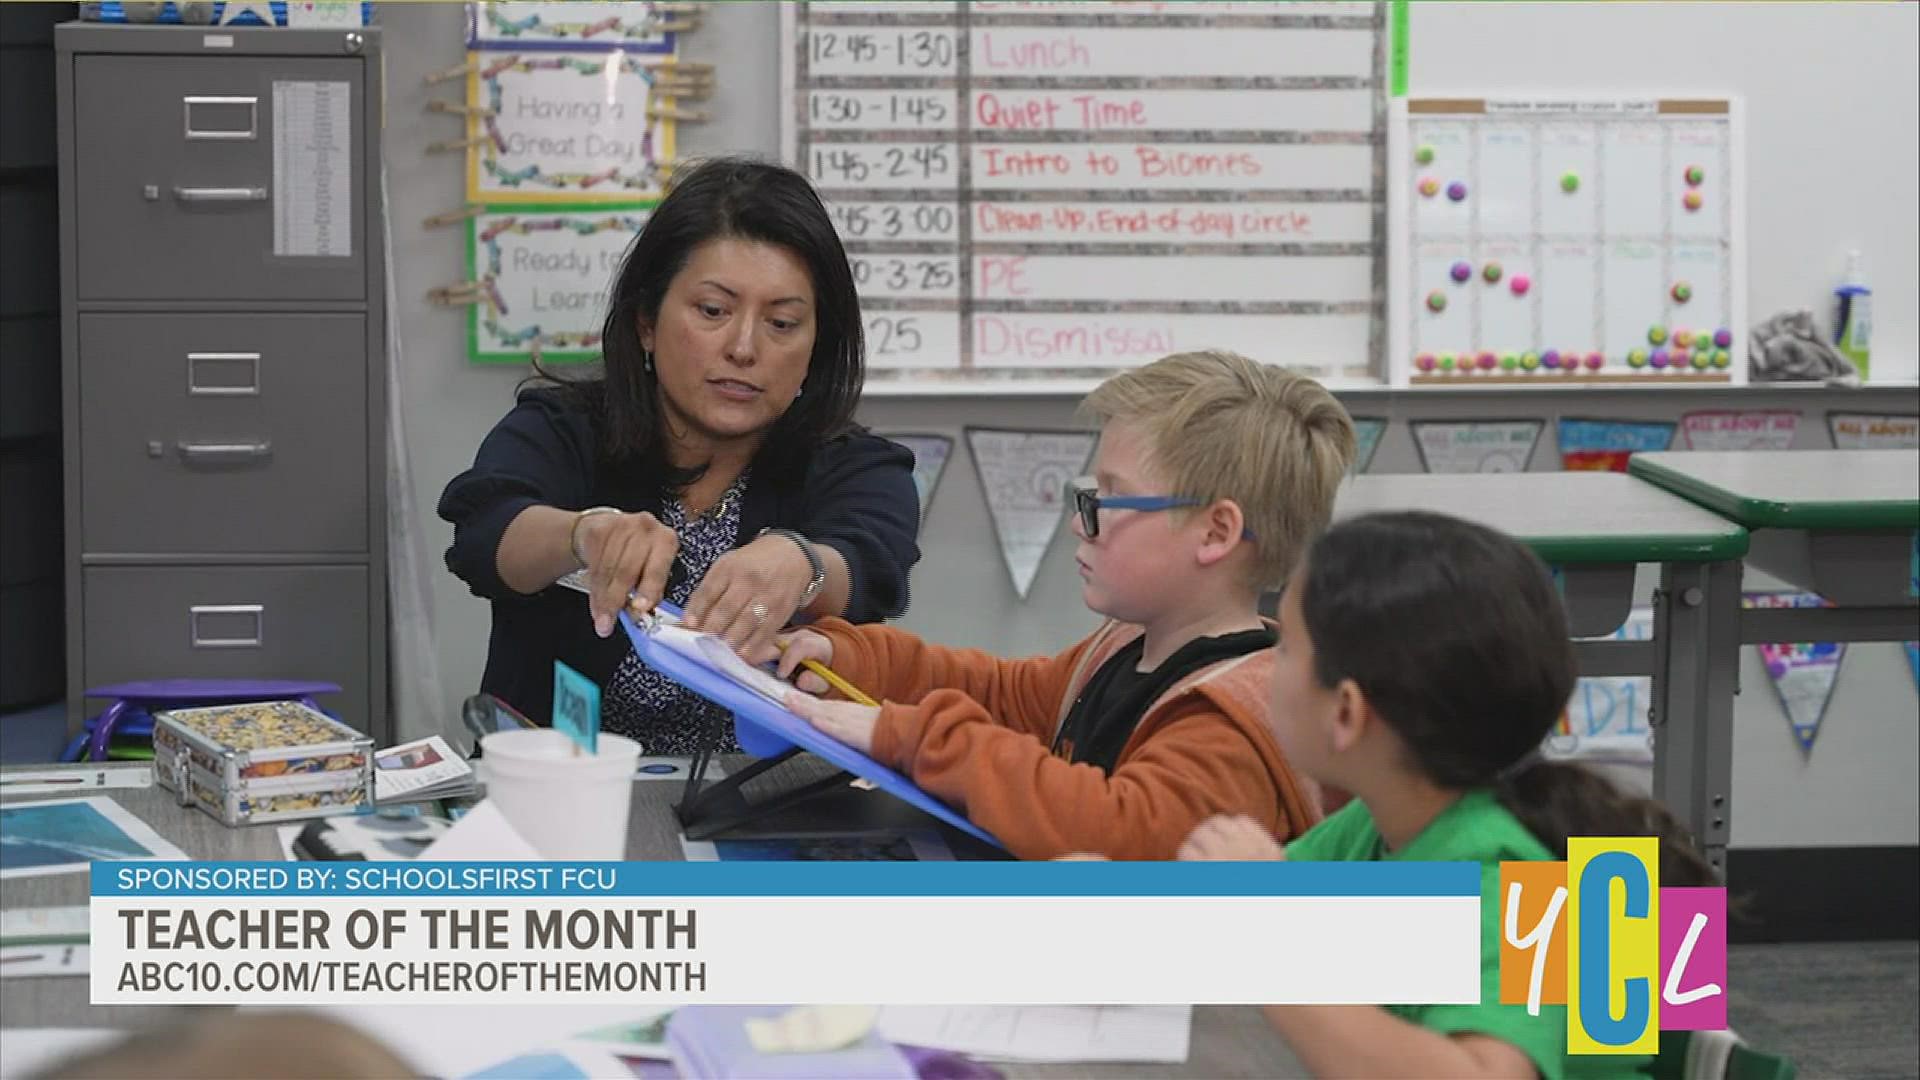 Today we celebrate one educator whose dedication to their students is A+. To nominate a teacher, go to abc10.com/teacherofthemonth